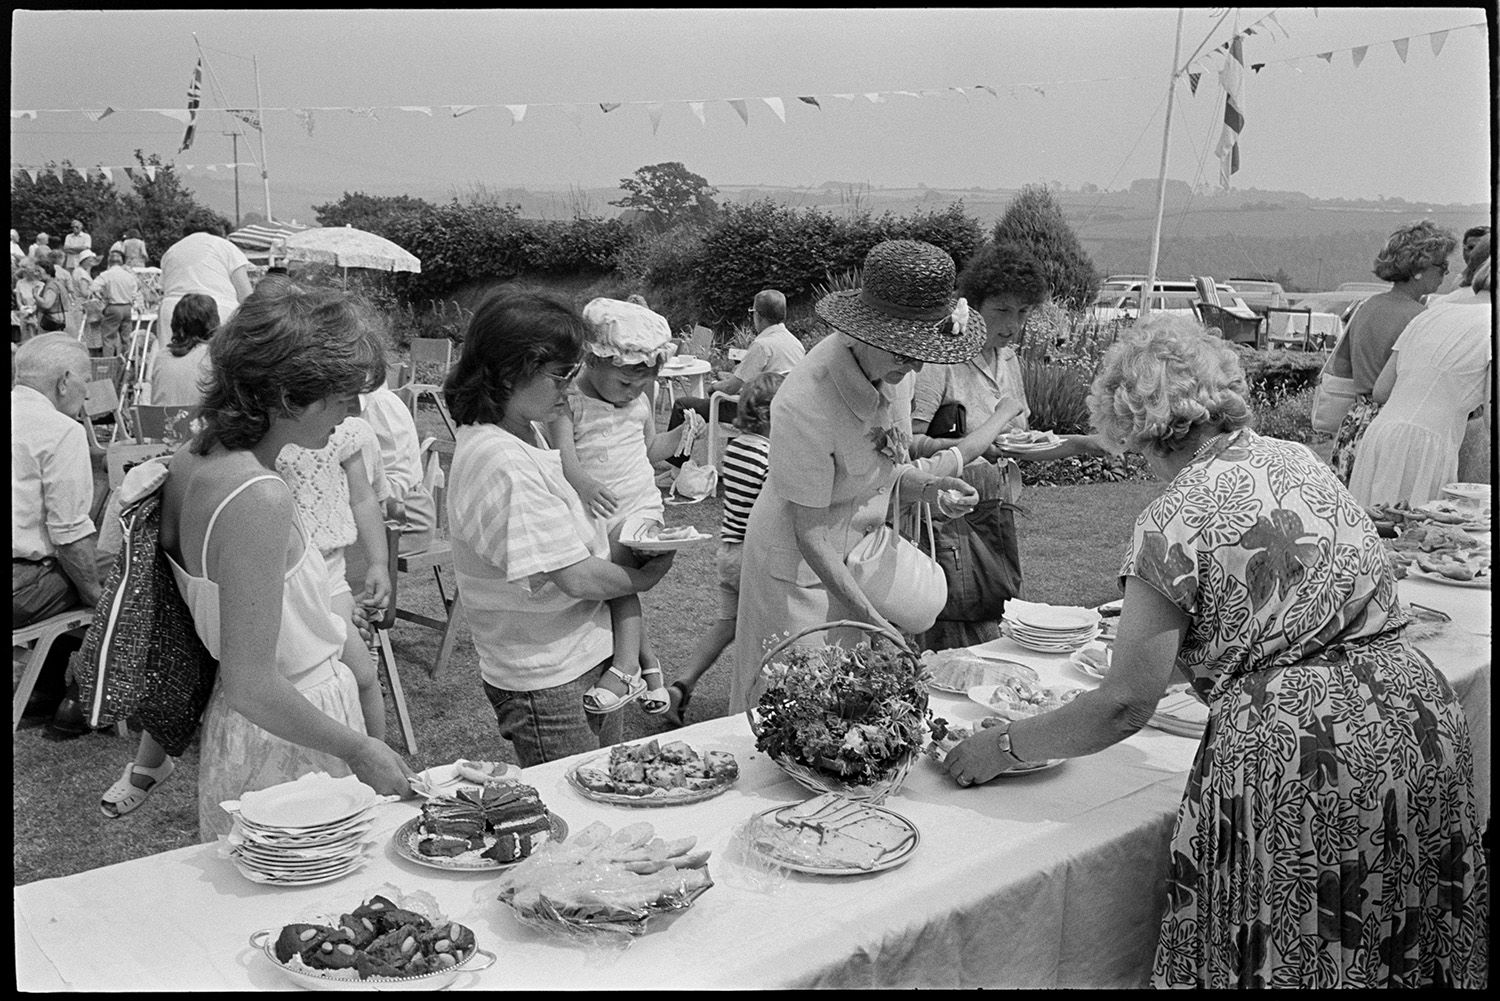 Church fete in garden, stalls, cakes, vicar making speech, thatched pavilion.
[Women and children at a refreshments table during a Church fete in a garden at Cricket Close, Chulmleigh. There are plates, cakes and sandwiches on the table. People sitting at tables, with parked cars behind a hedge, with flags and bunting in the background.]